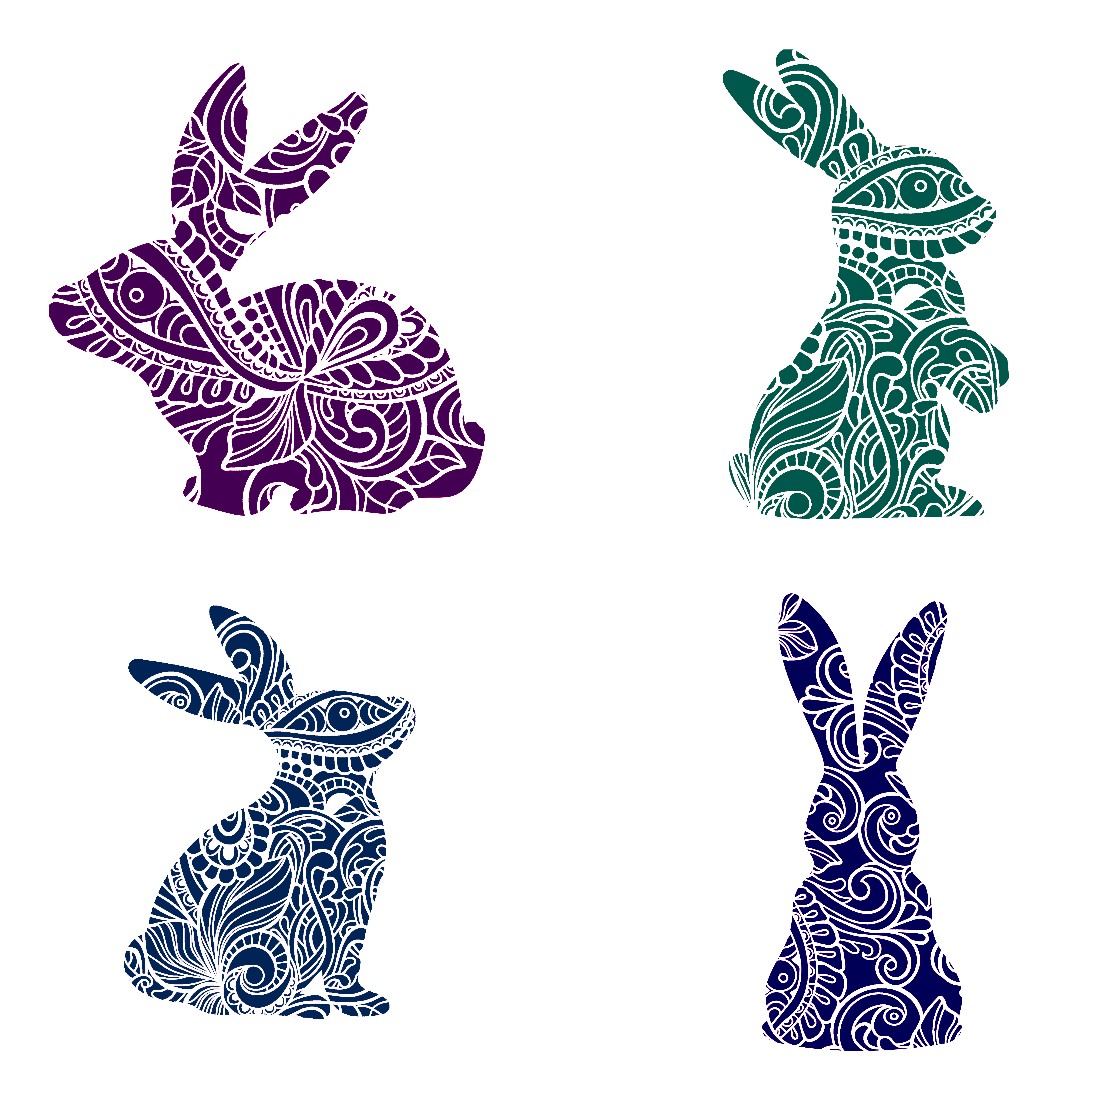 Decorative Bunny Set of 6 Stickers Muliti Colored SVG and PNG Files cover image.